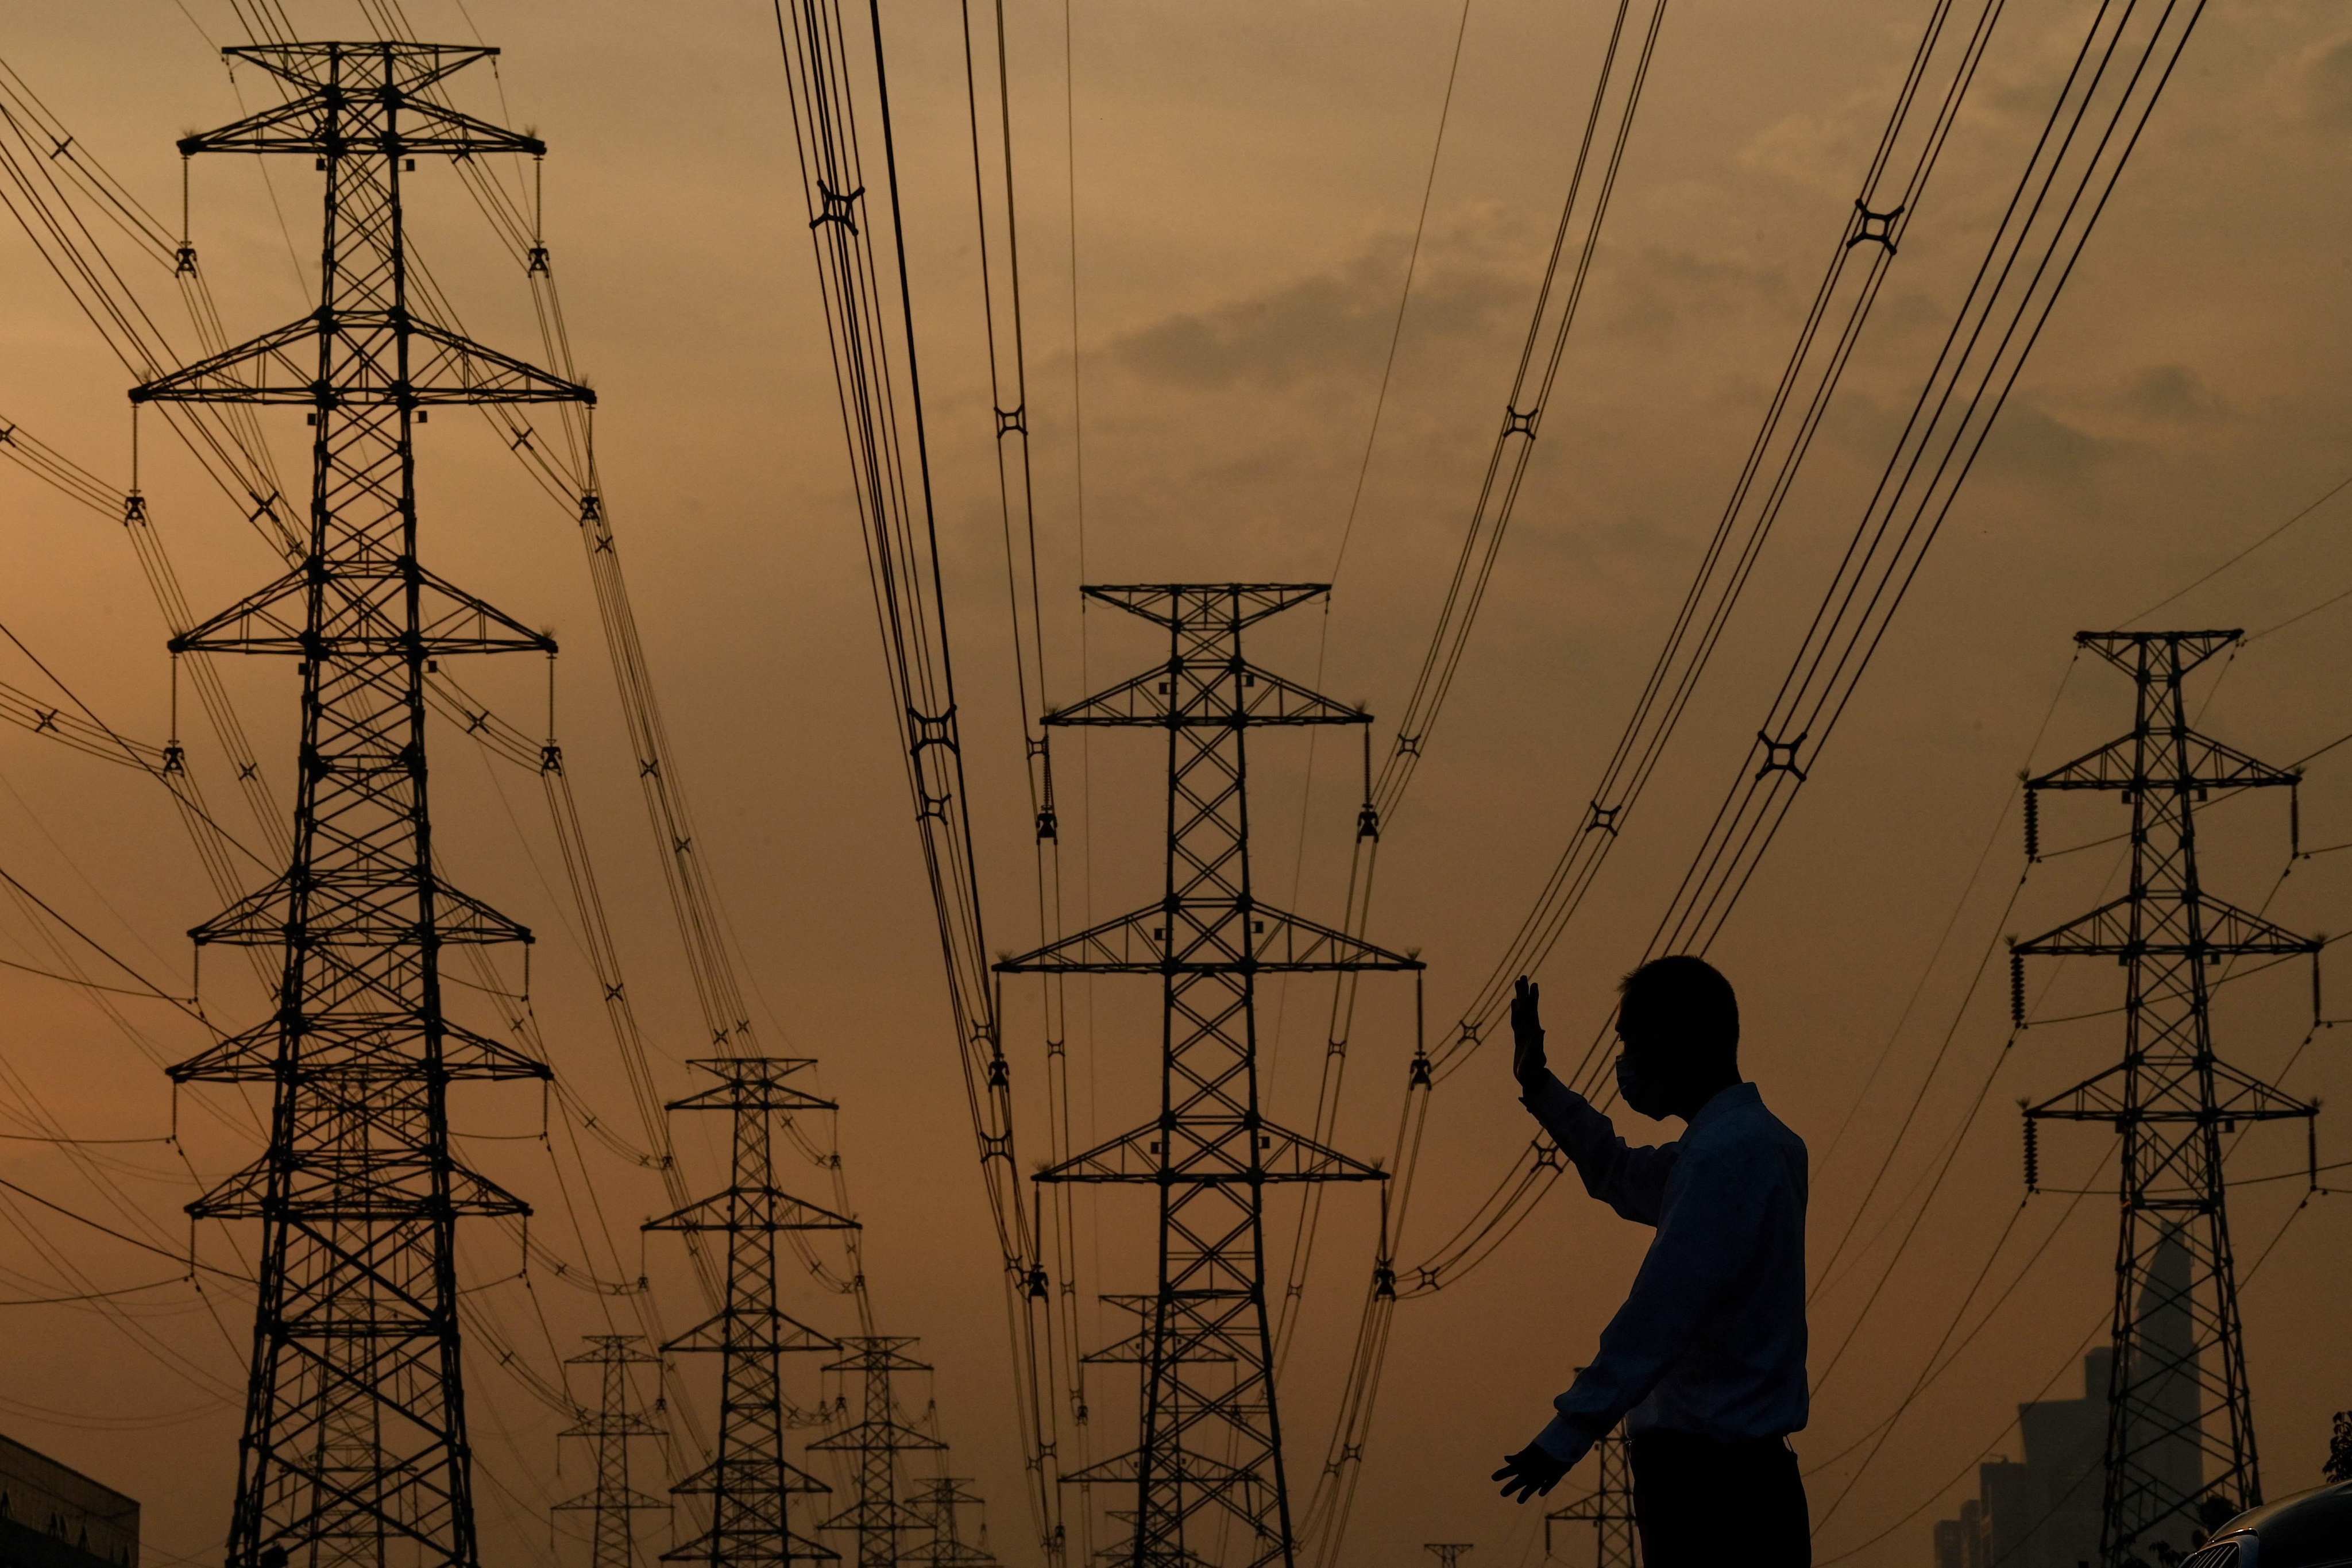 China needs to resolve inefficiencies in its grid infrastructure and grid management, analysts say. Photo: AFP